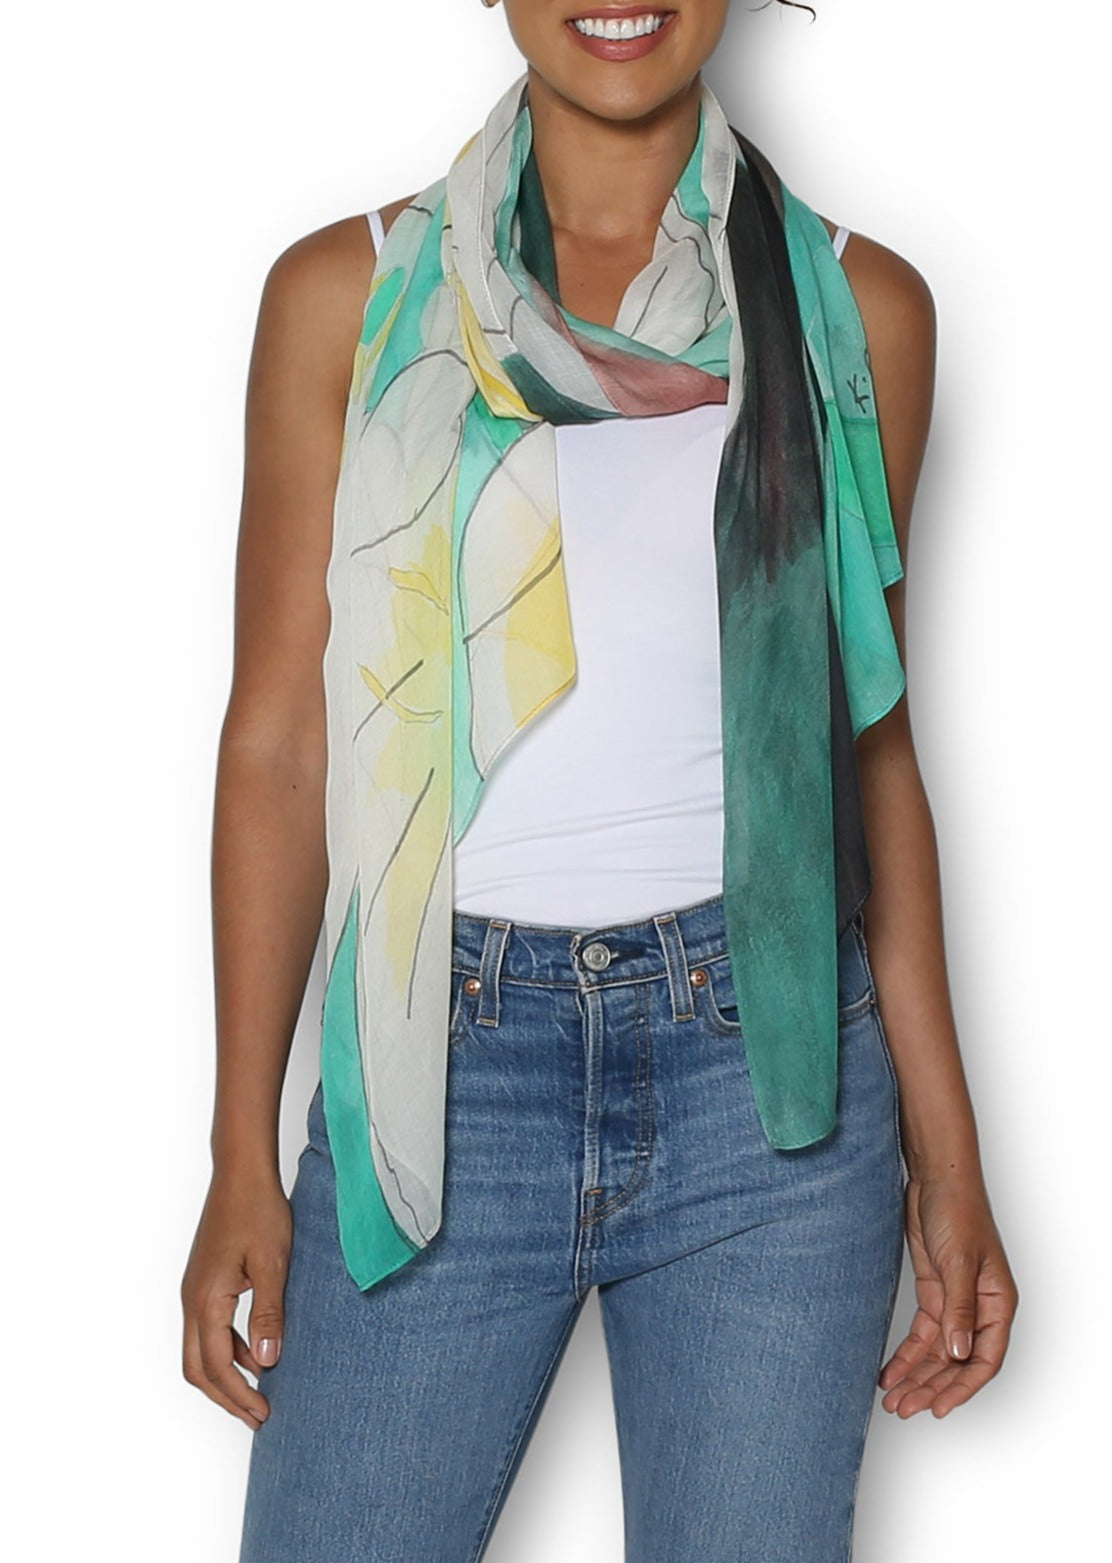 The Artists Label White Tulips illustration Scarf